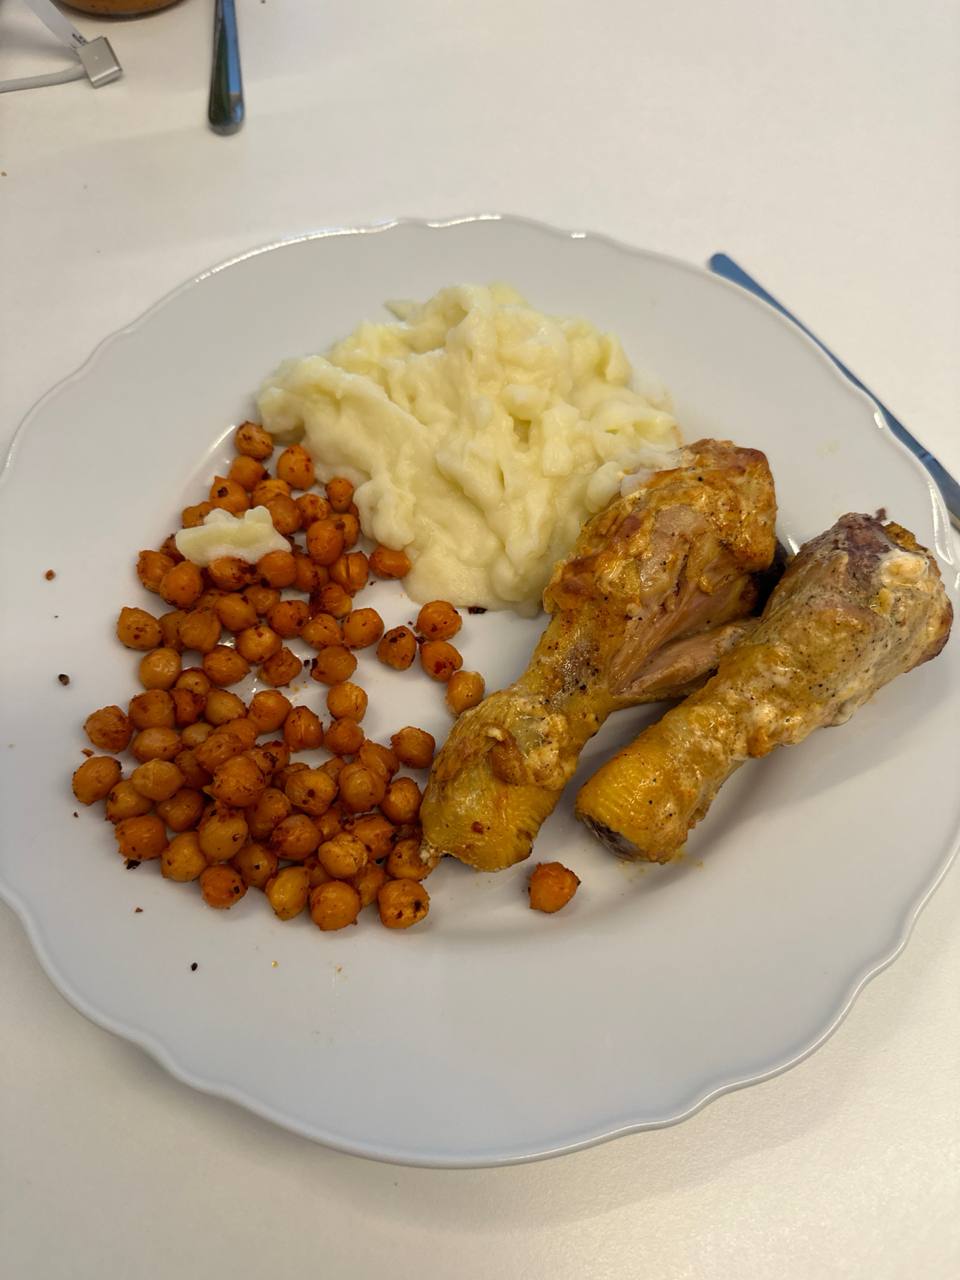 Roasted Chicken Drumsticks, Mashed Potatoes, And Roasted Chickpeas